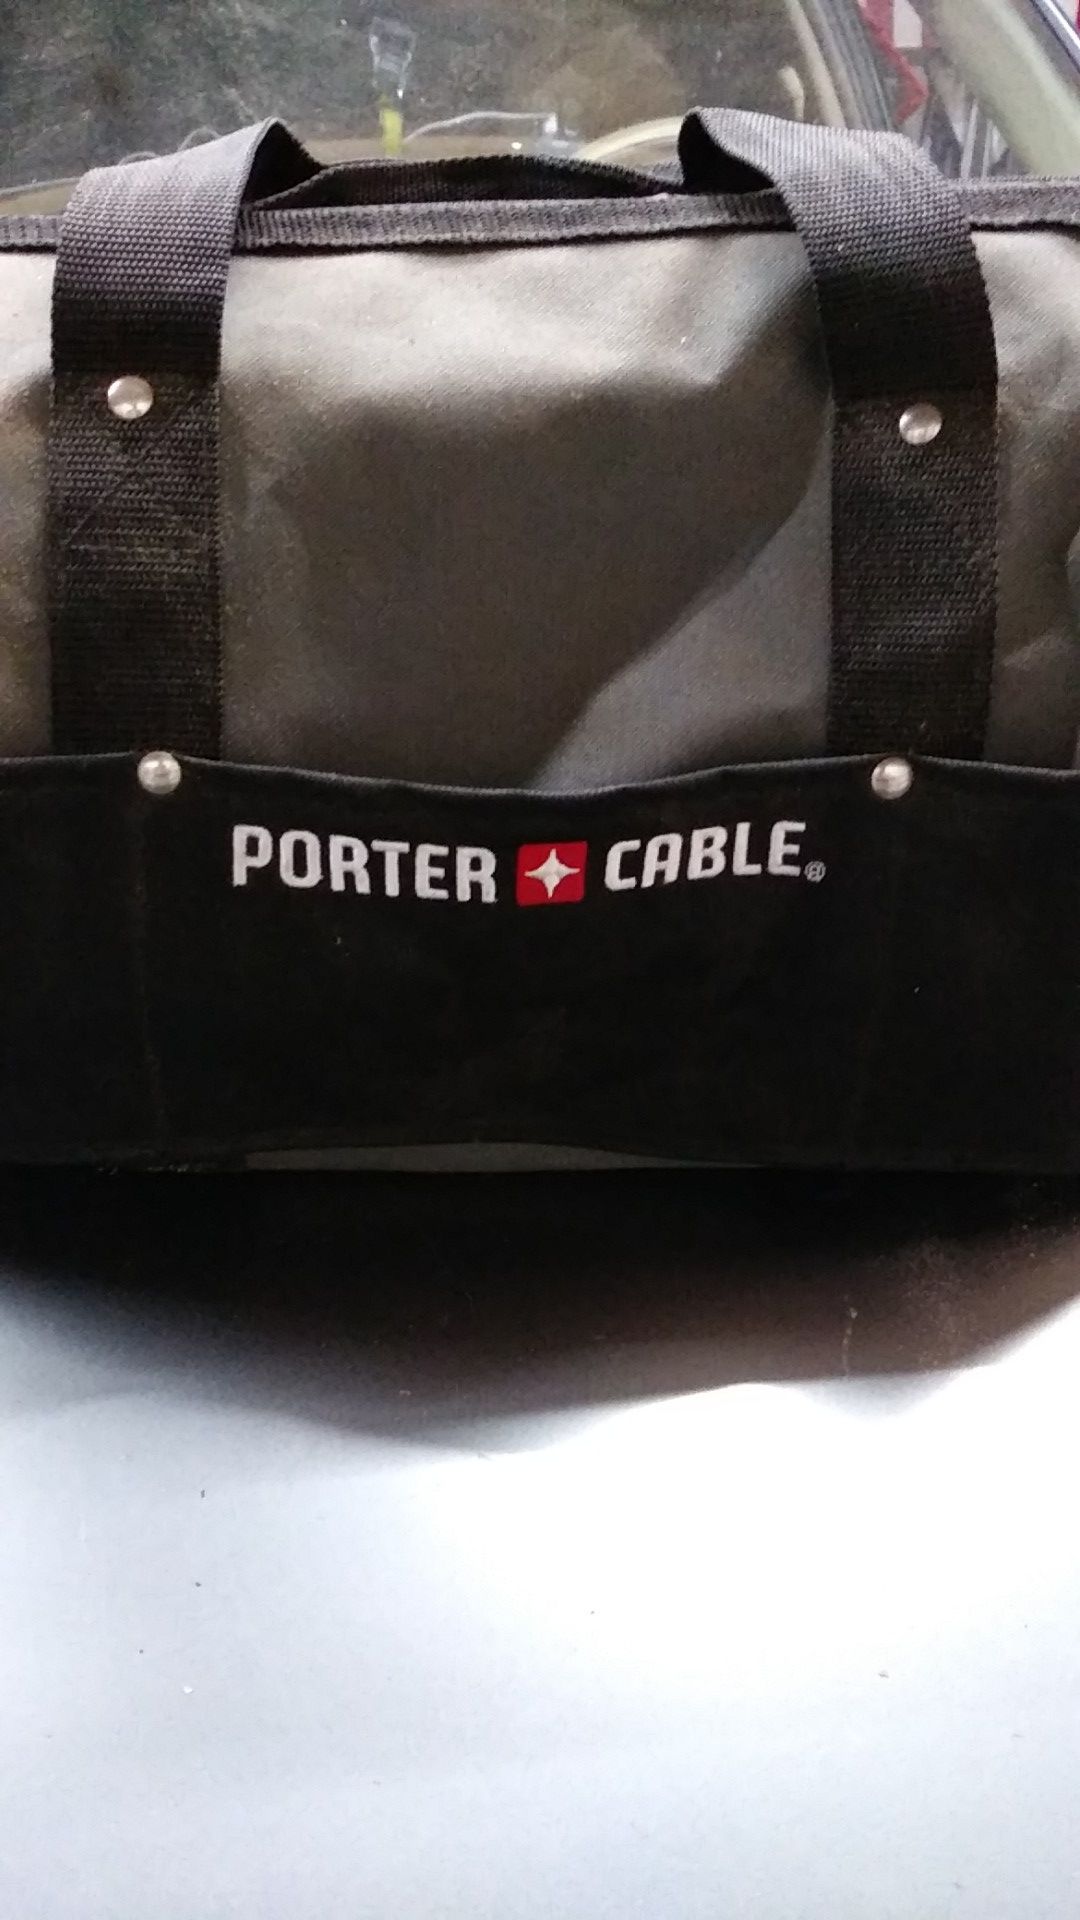 Porter-Cable double insulated circular saw